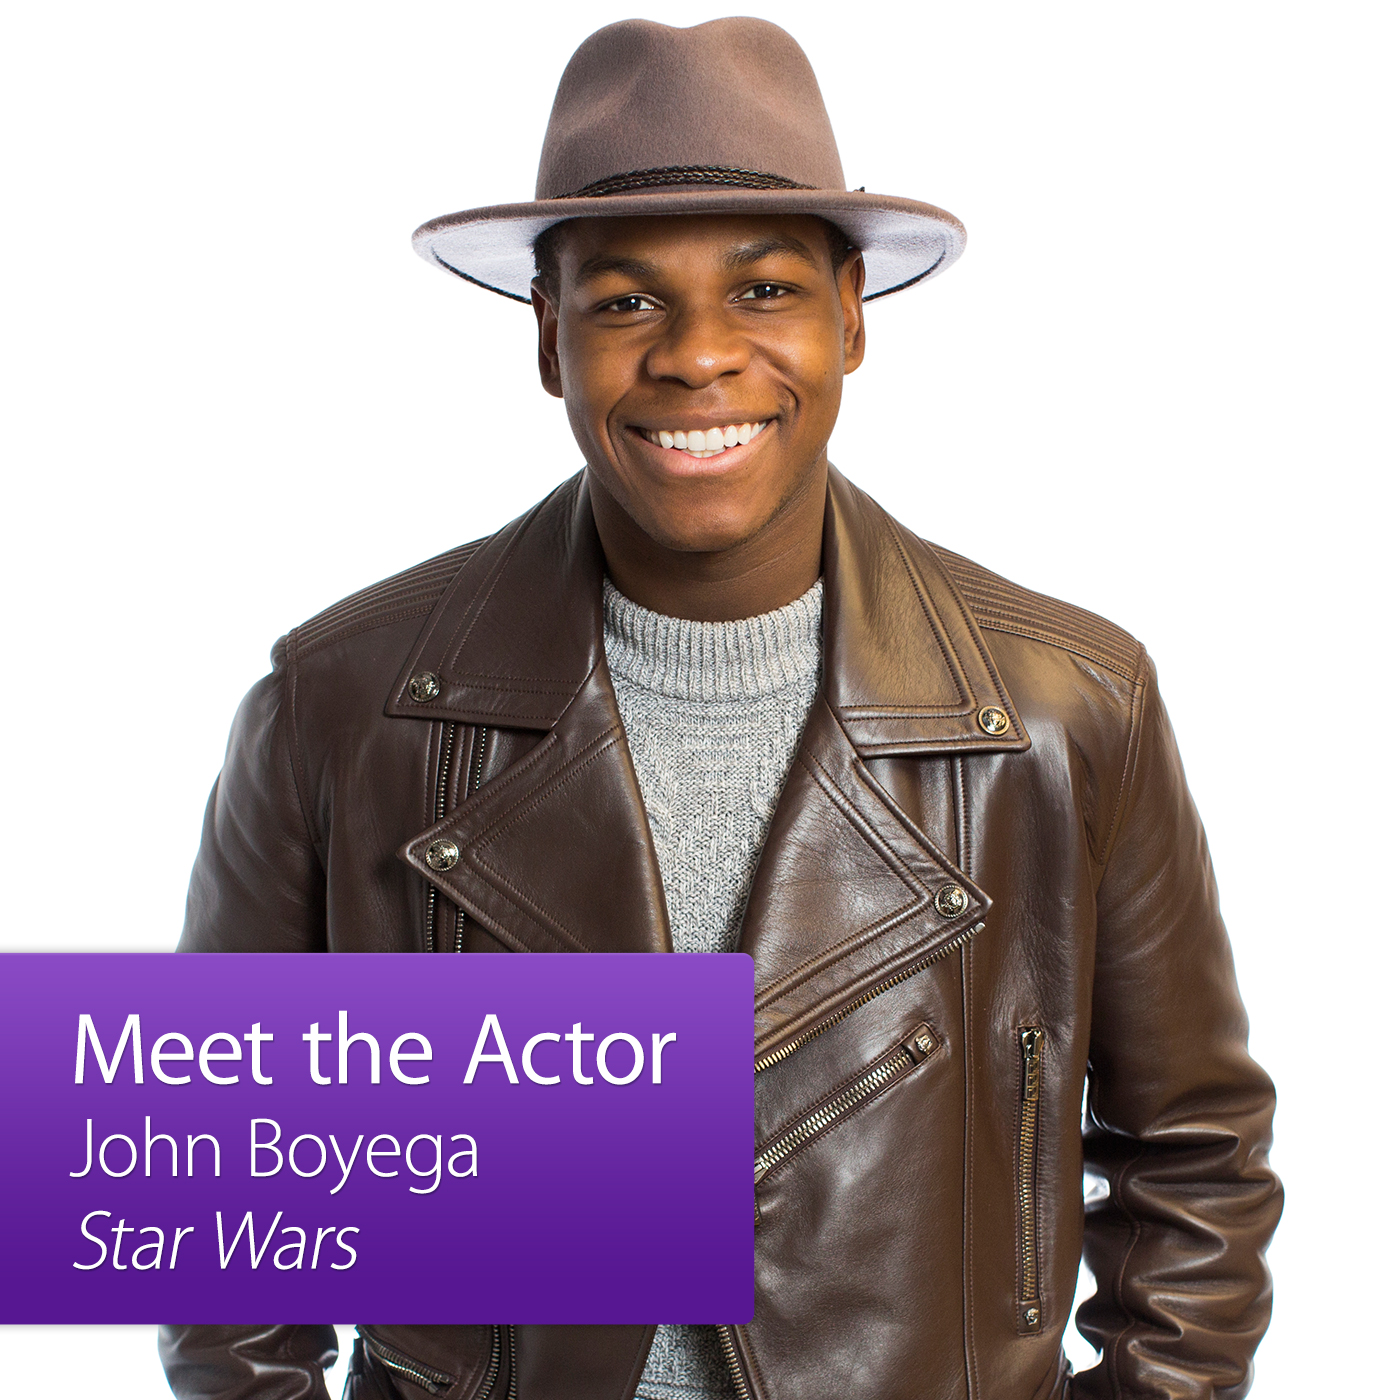 "Star Wars: The Force Awakens": Meet the Actor